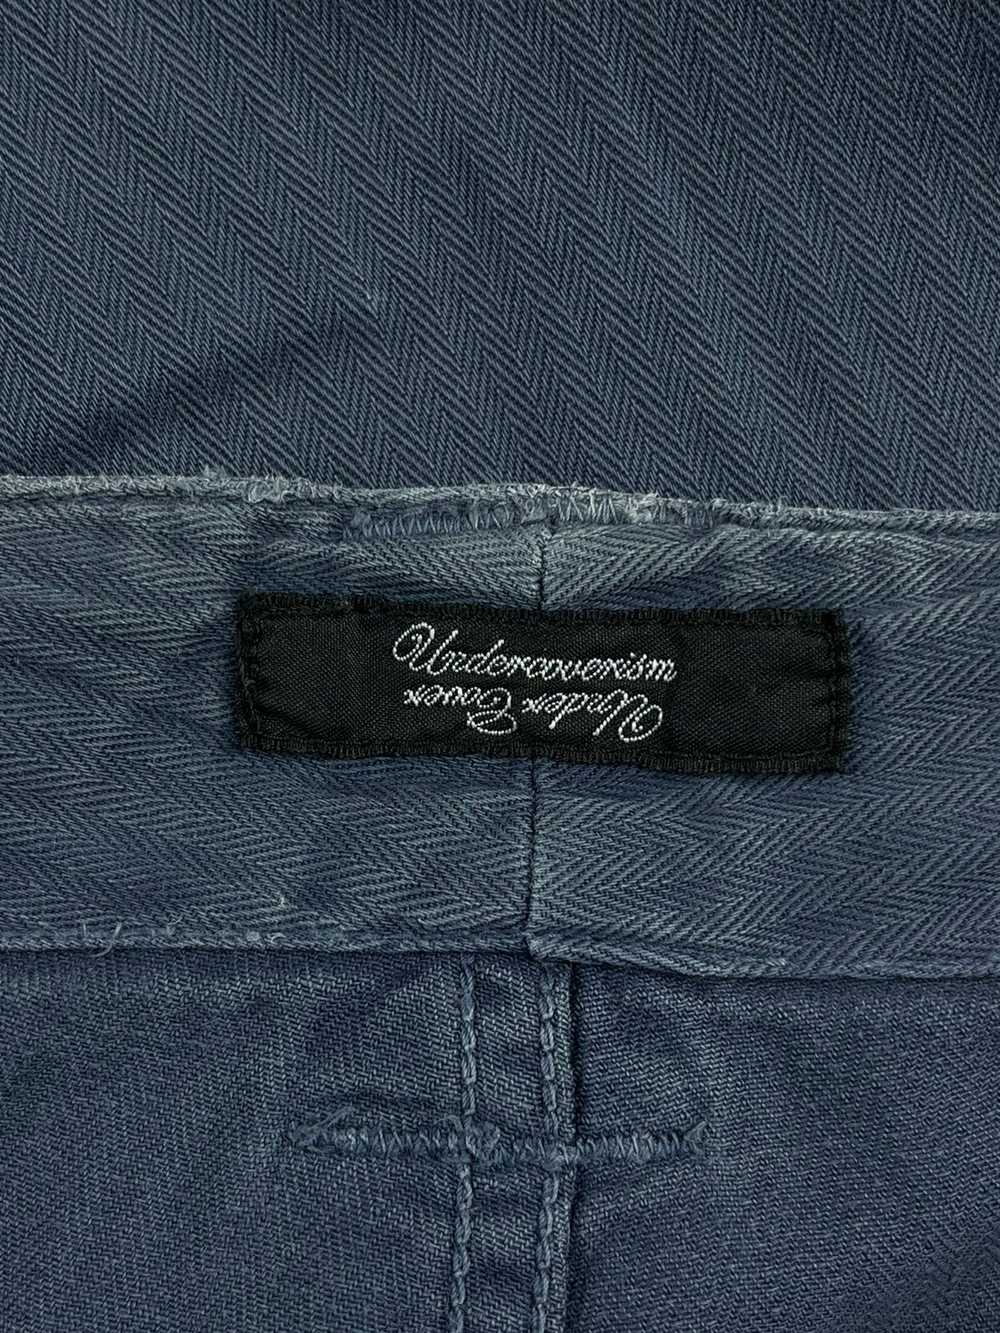 Undercover SS11 Undercover Underman Painter Pants - image 7